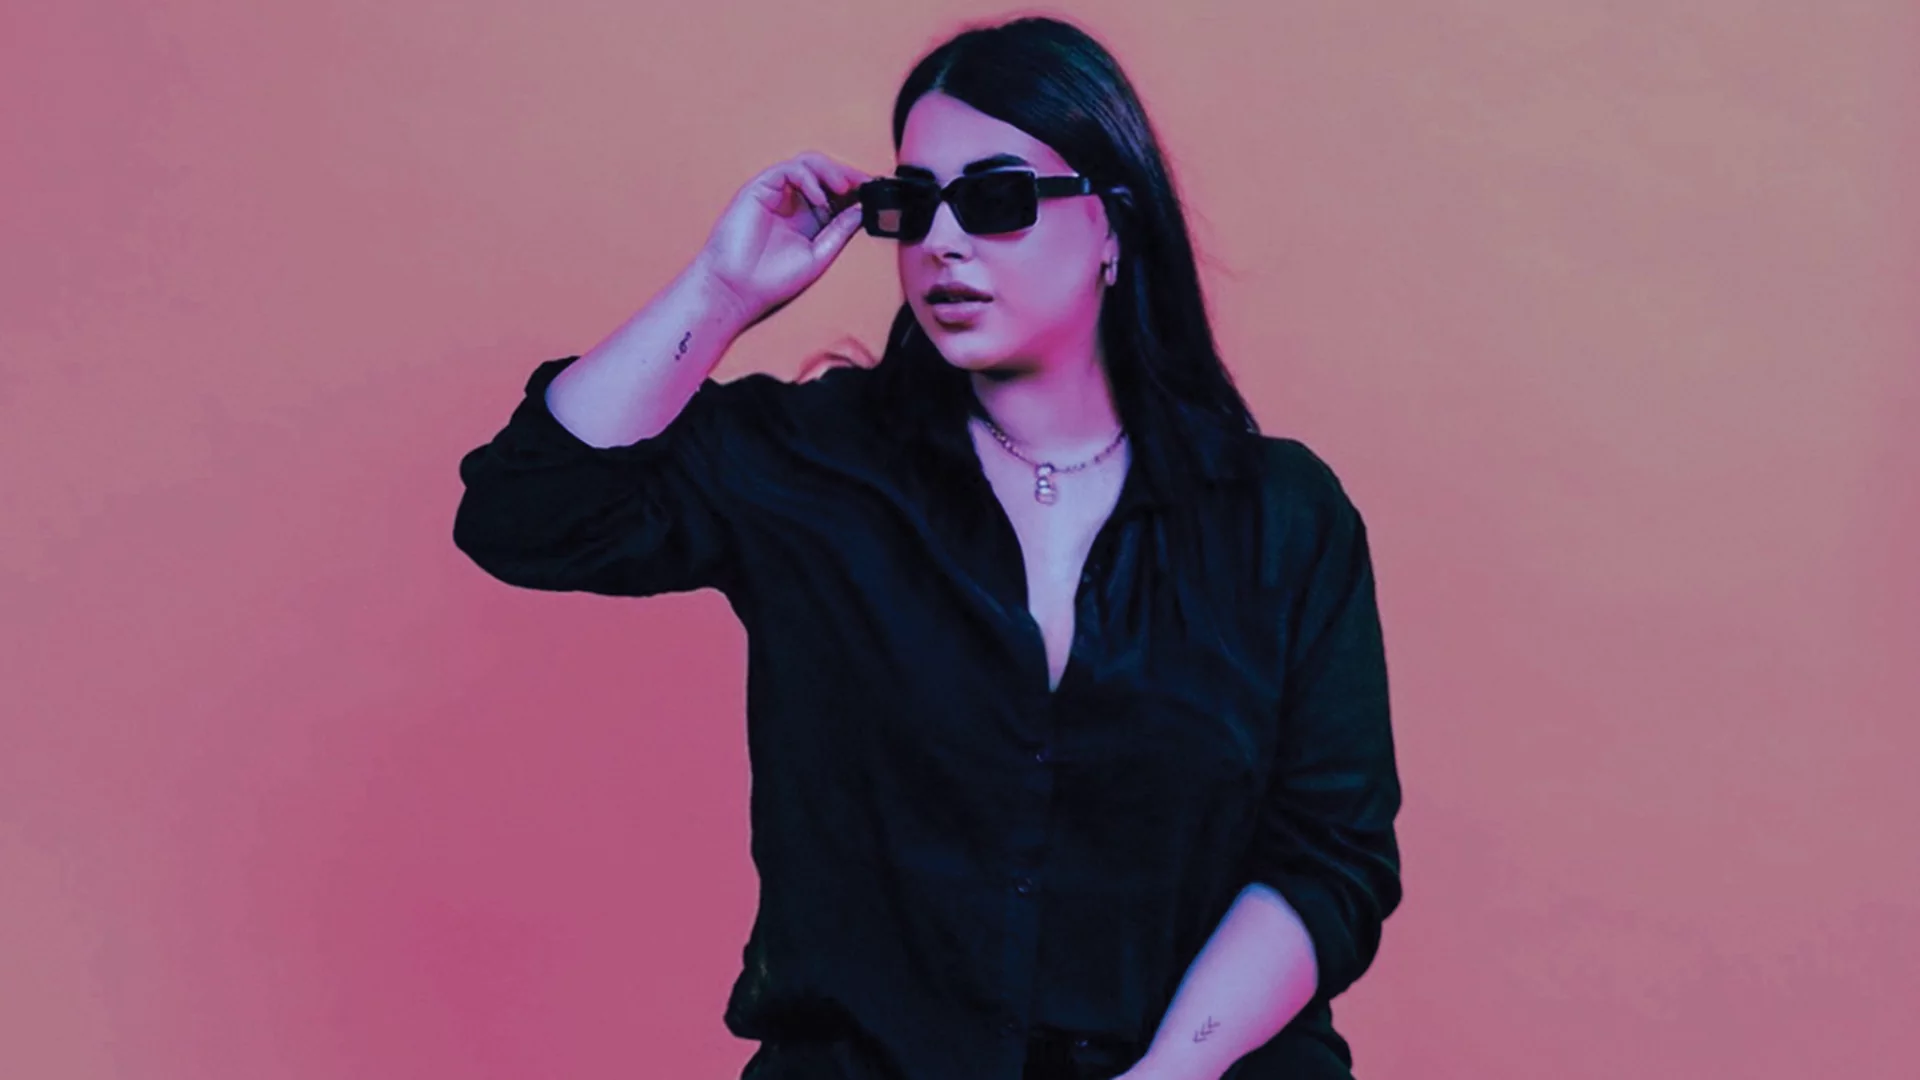 Naz wearing black sunglasses, standing against a pink backdrop